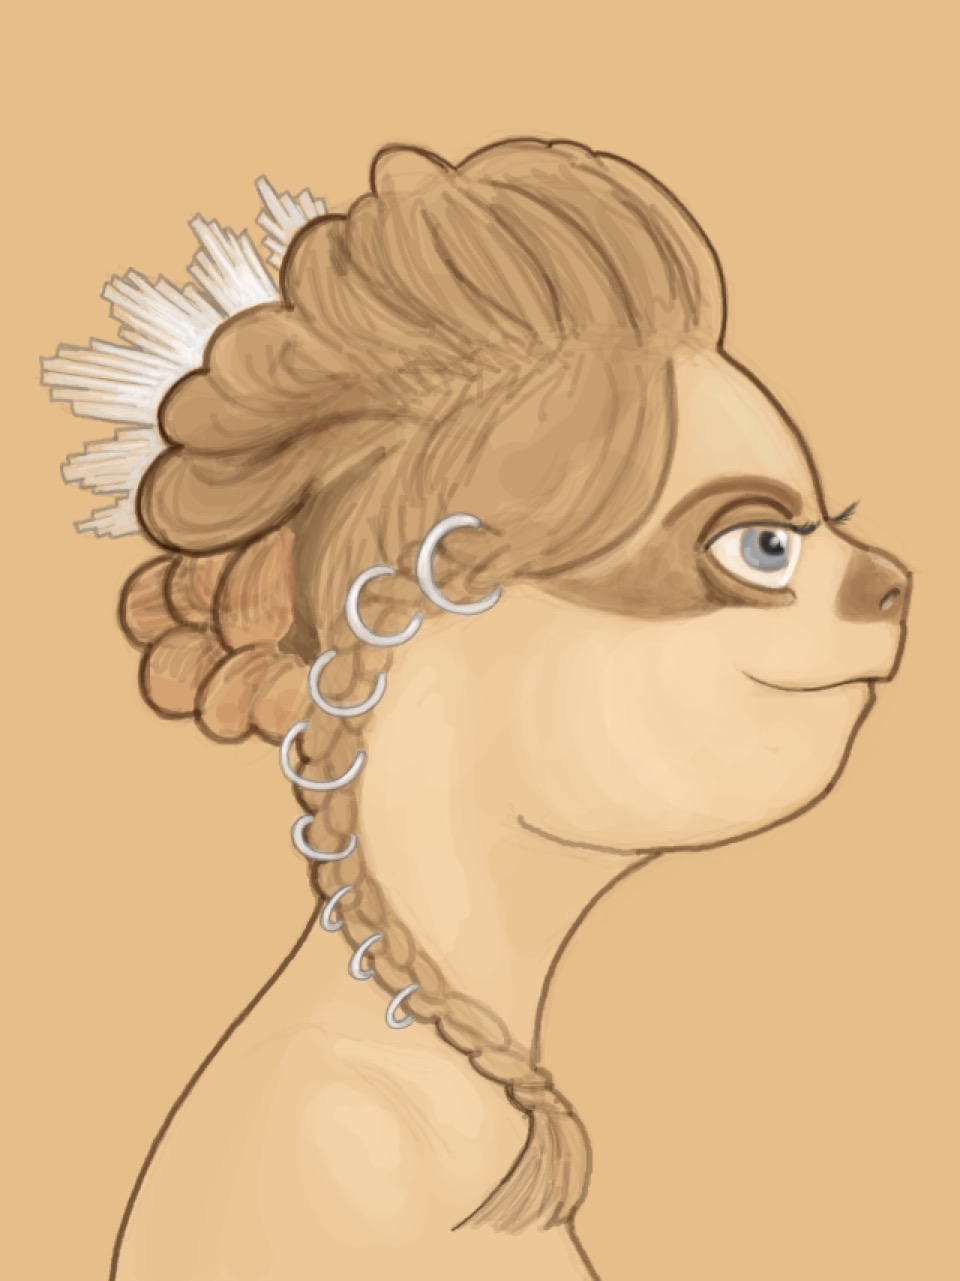 Profile portrait of a sloth with an elegant hairdo, in sepia tones